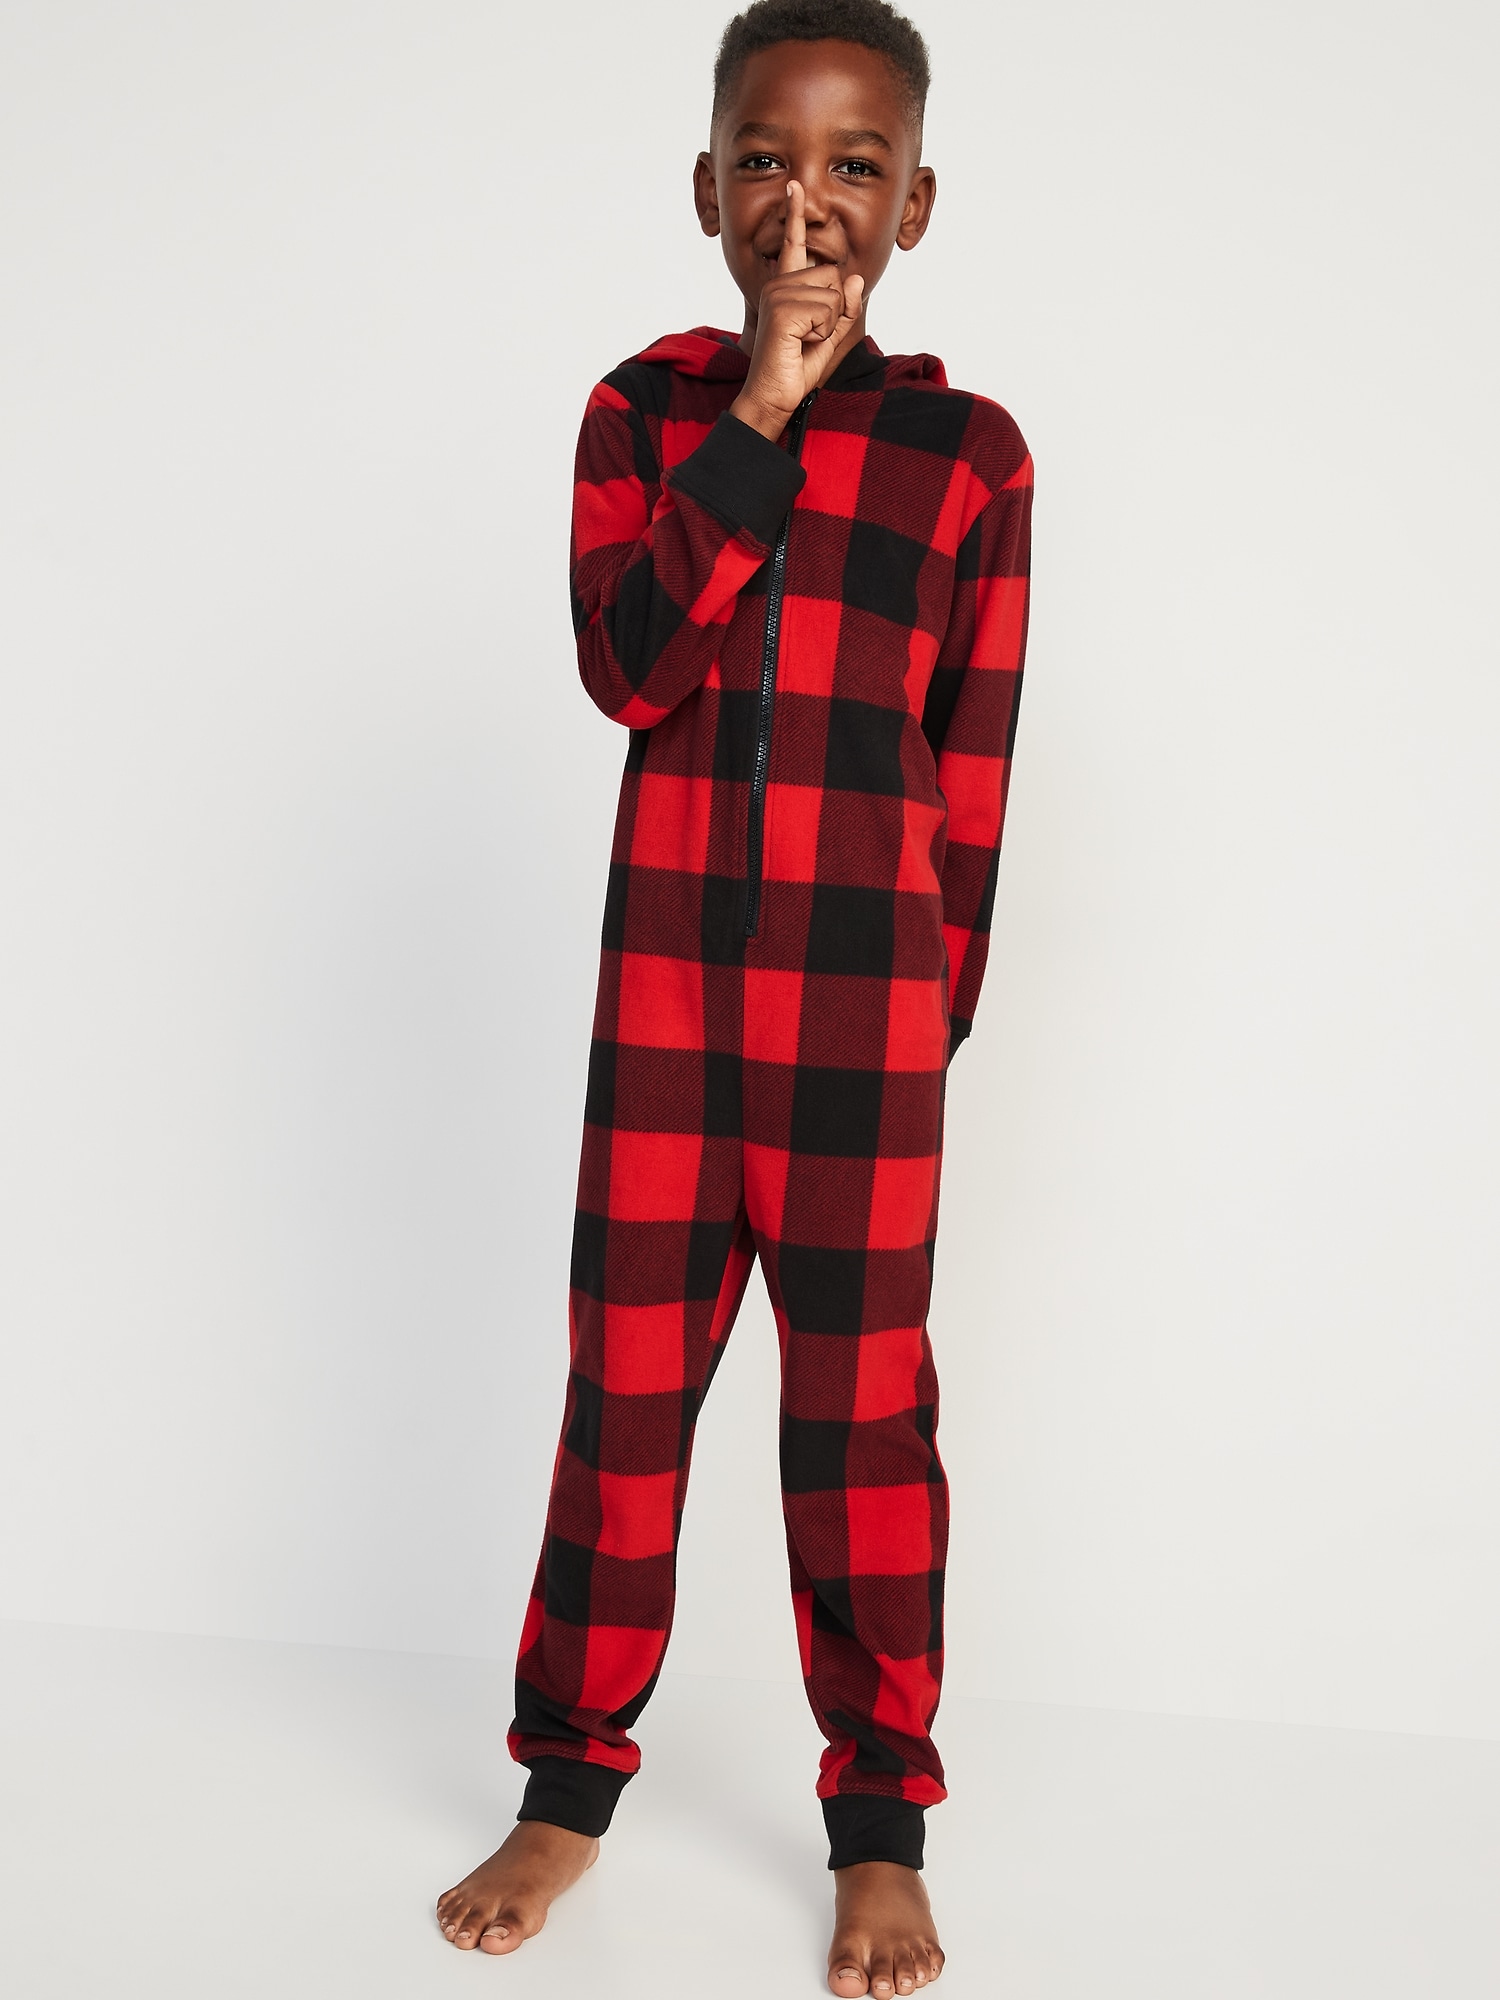 Oldnavy Gender-Neutral Matching Microfleece Hooded One-Piece Pajamas for Kids